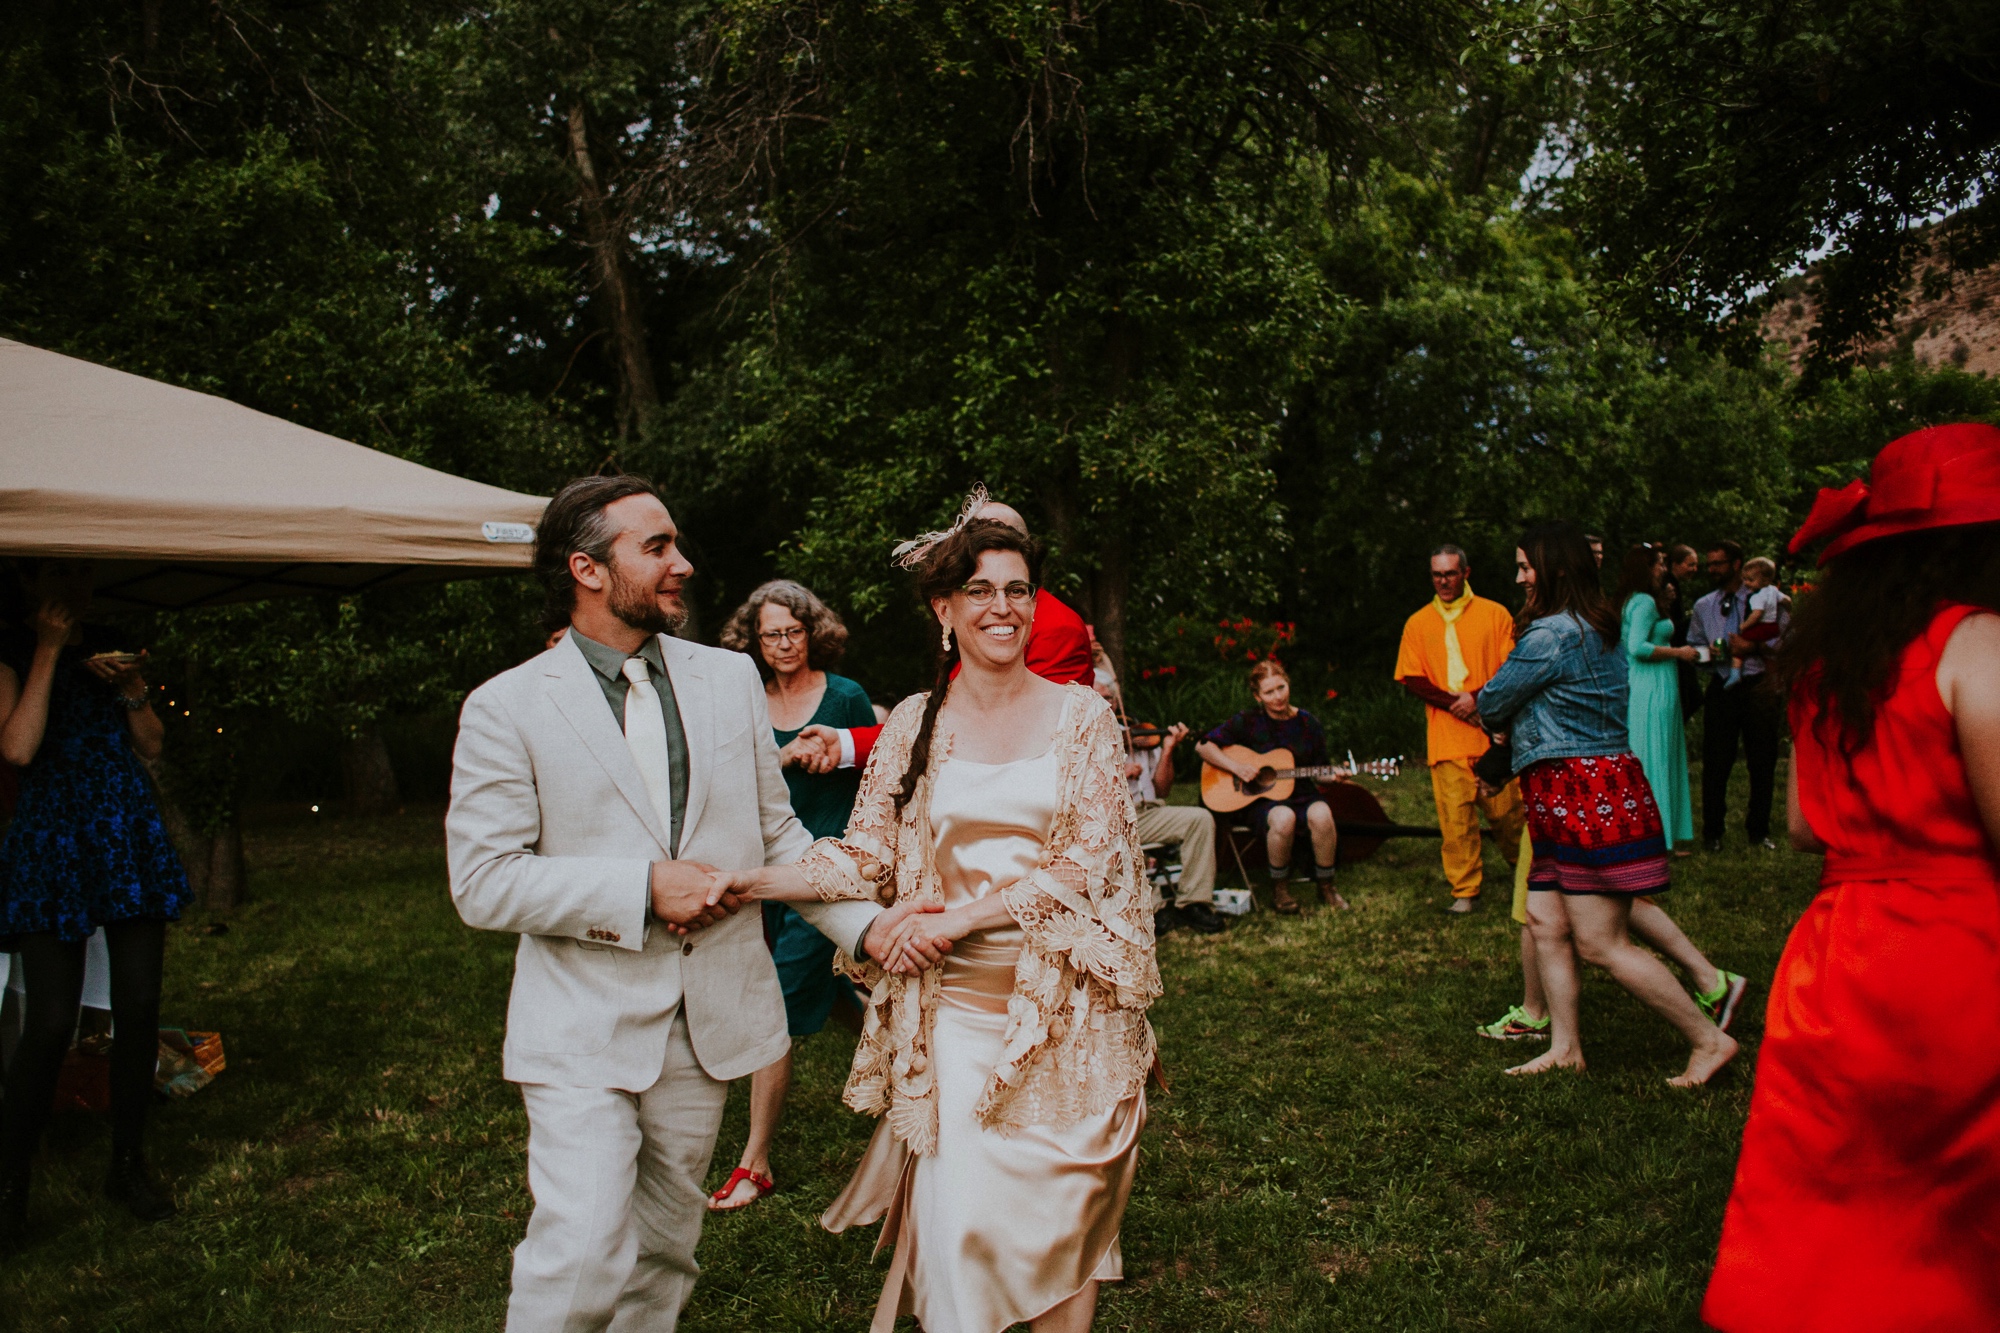  The dress theme for the whole wedding celebration was rainbows - their guests dressed in one color head to toe as part of the theme. The wedding reception at the ranch was near the orchard by the acequia, and was lit by candles and solar lights prim